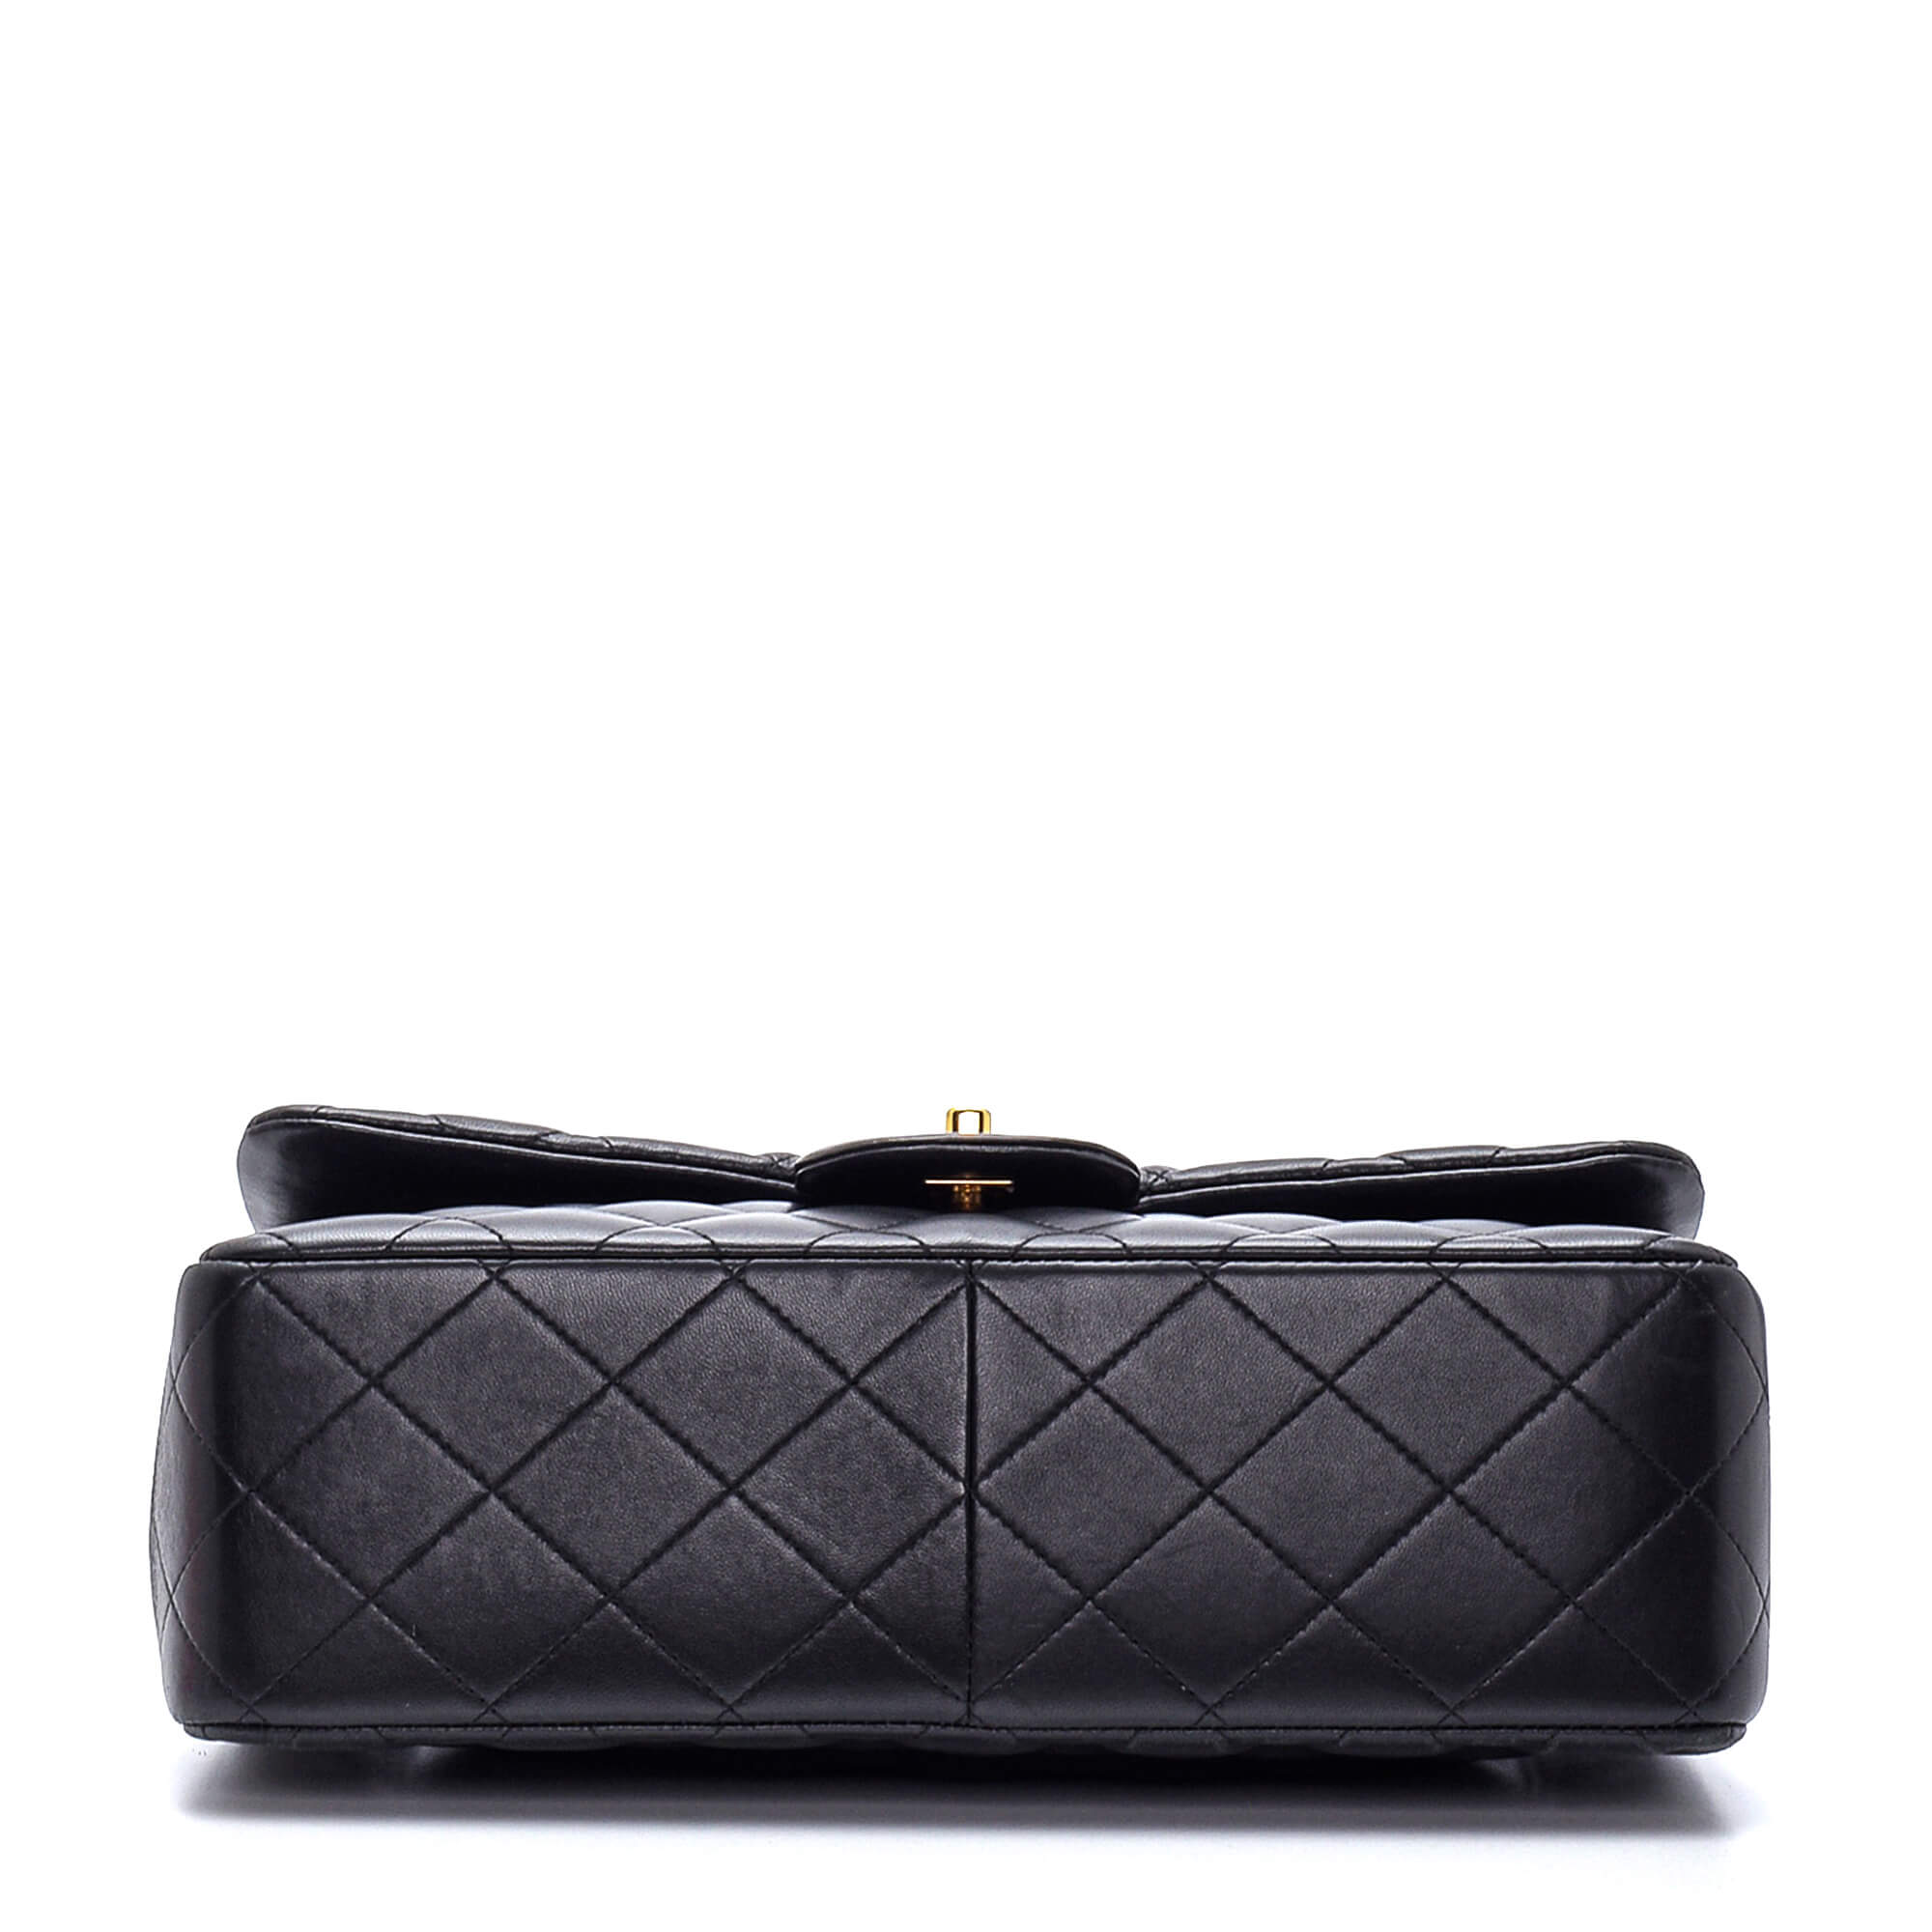 Chanel - Black Quilted Lambskin Leather Jumbo Double Flap Bag 